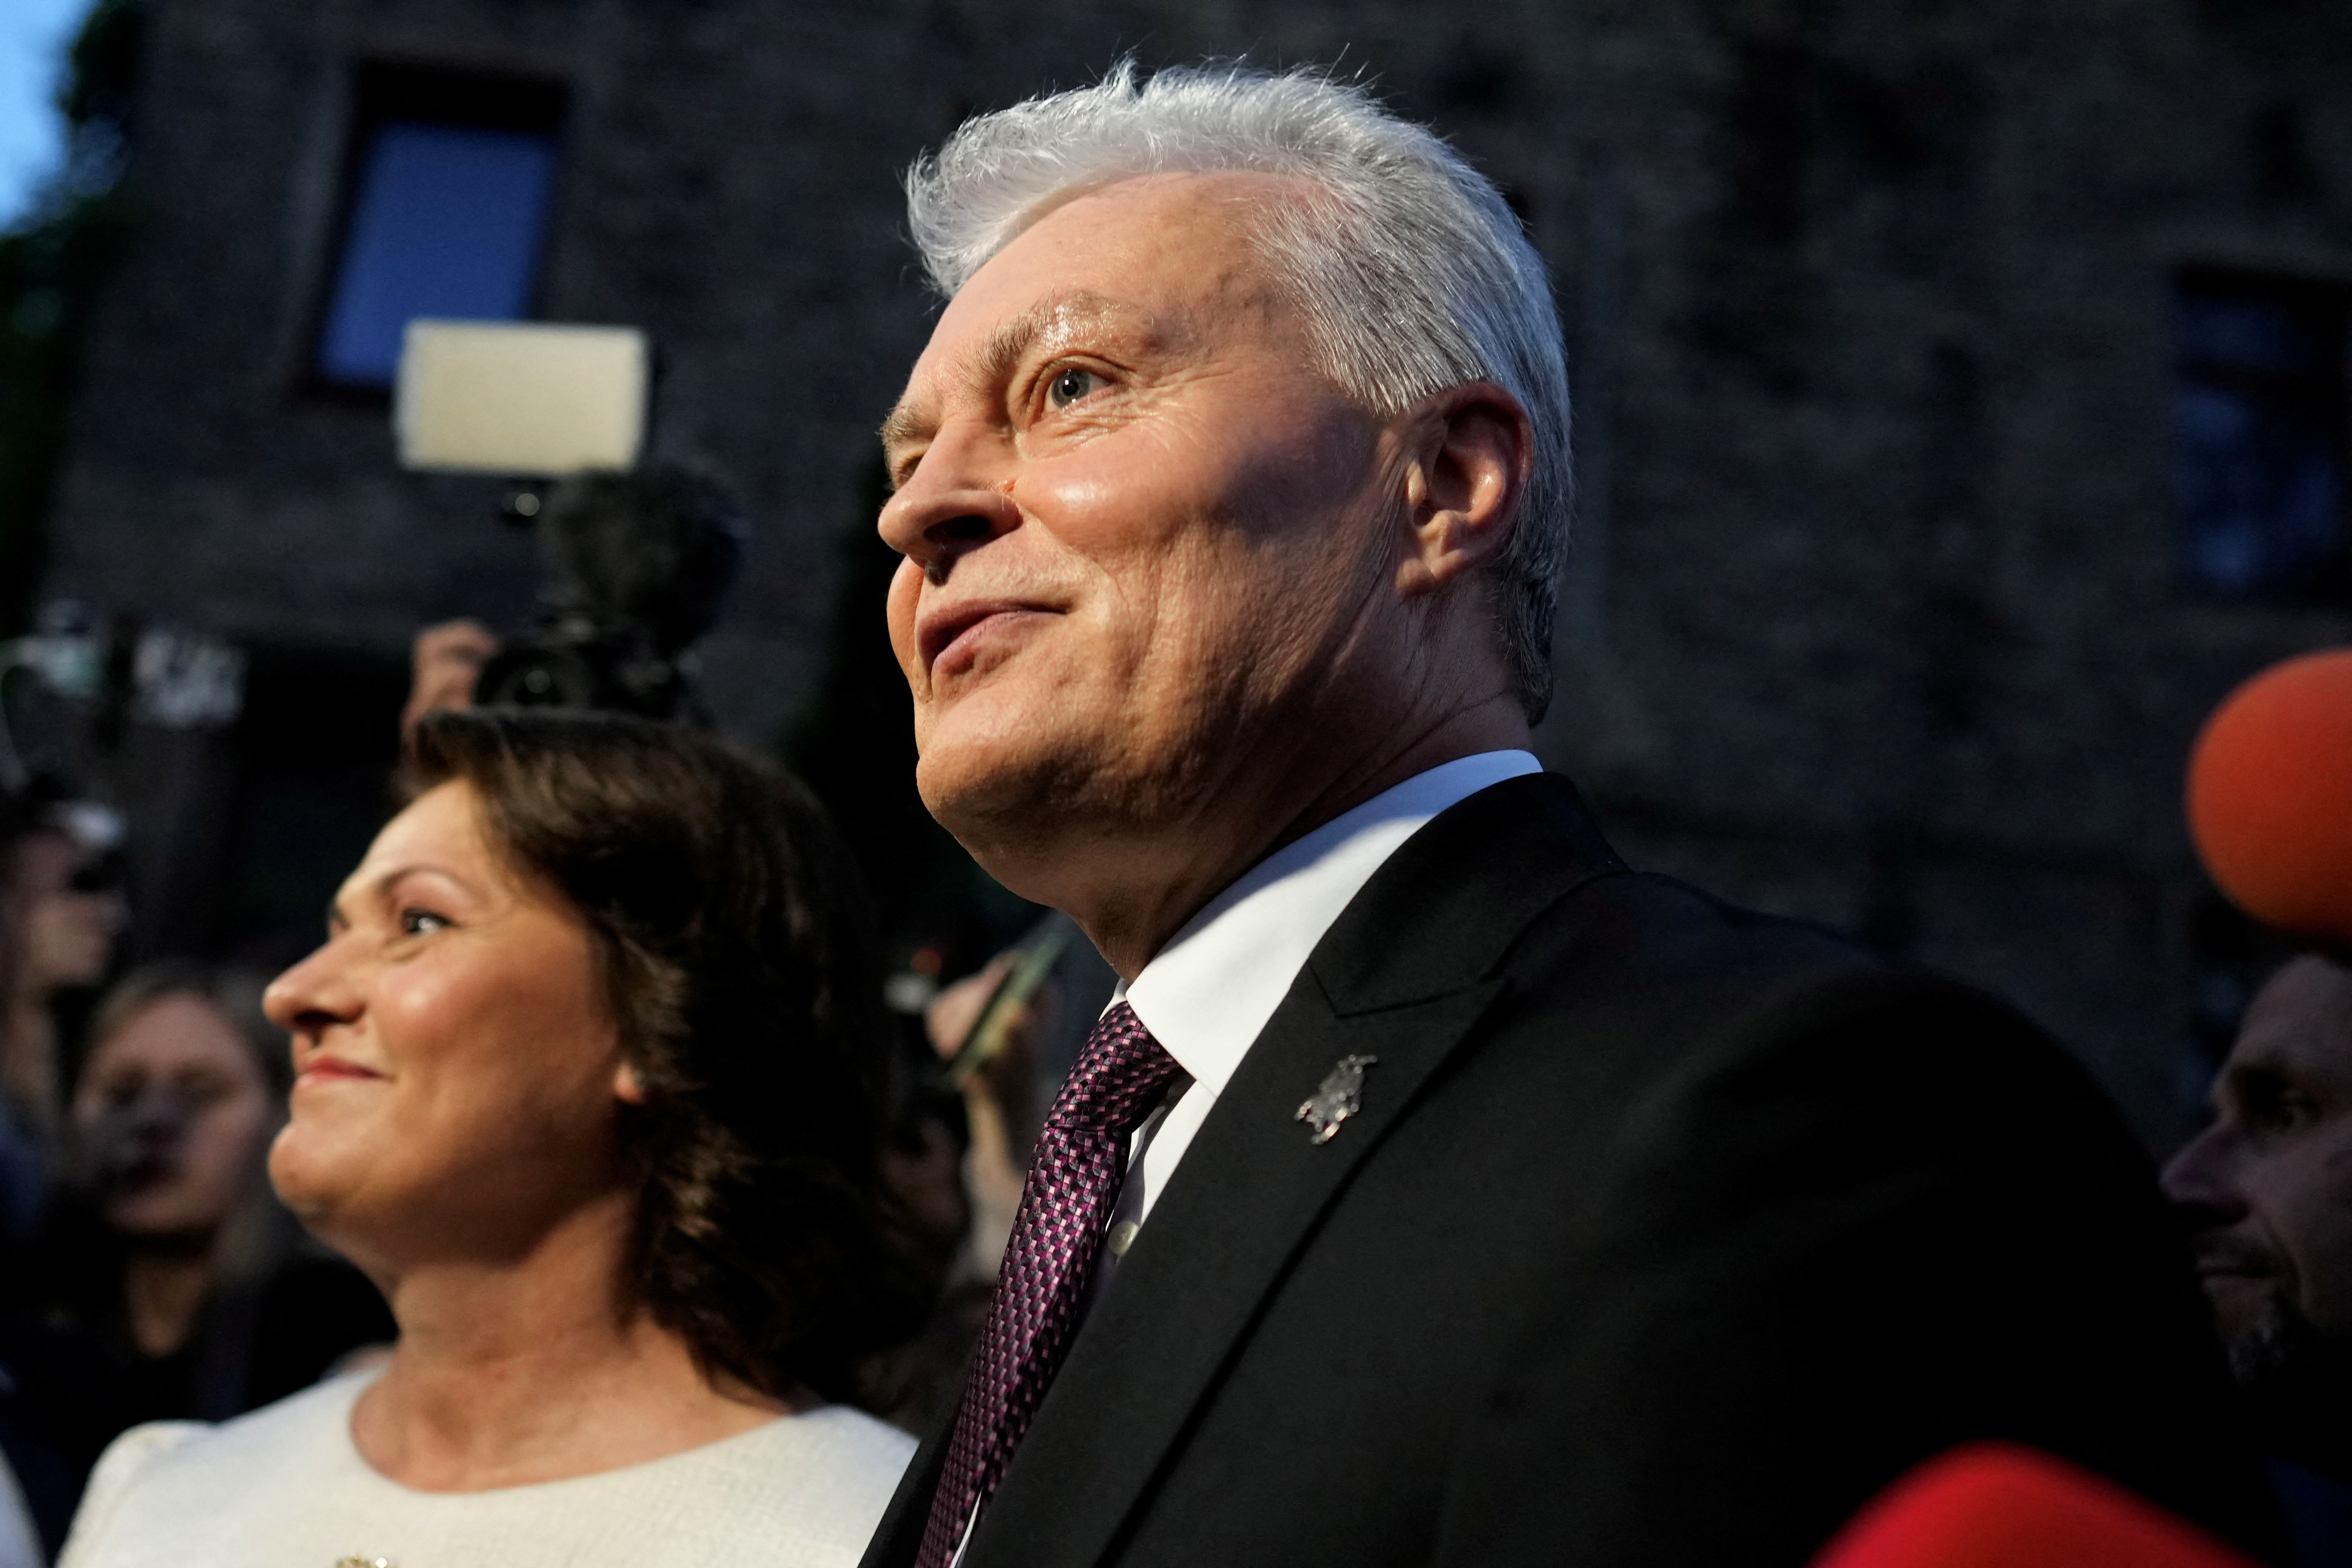 Lithuanian President Nauseda wins final round of presidential election in Vilnius